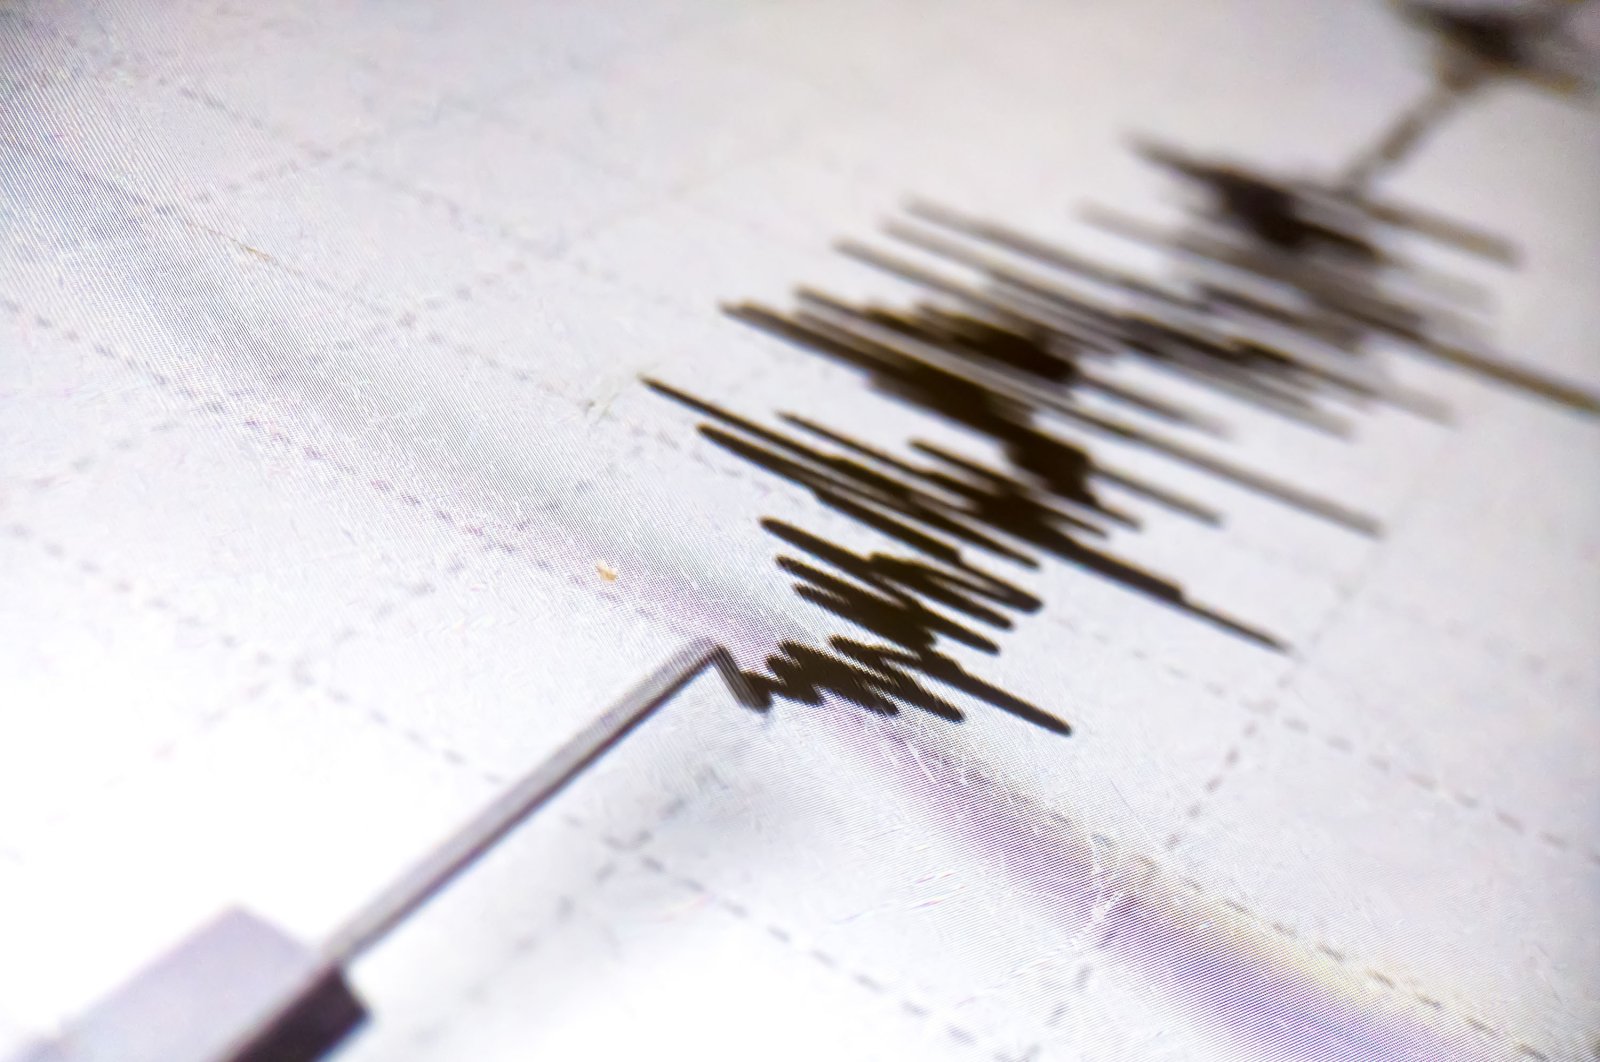 Richter scale Low and High Earthquake Waves with Vibration on white paper background, audio wave diagram concept, in this undated file photo. (Shutterstock File Photo)